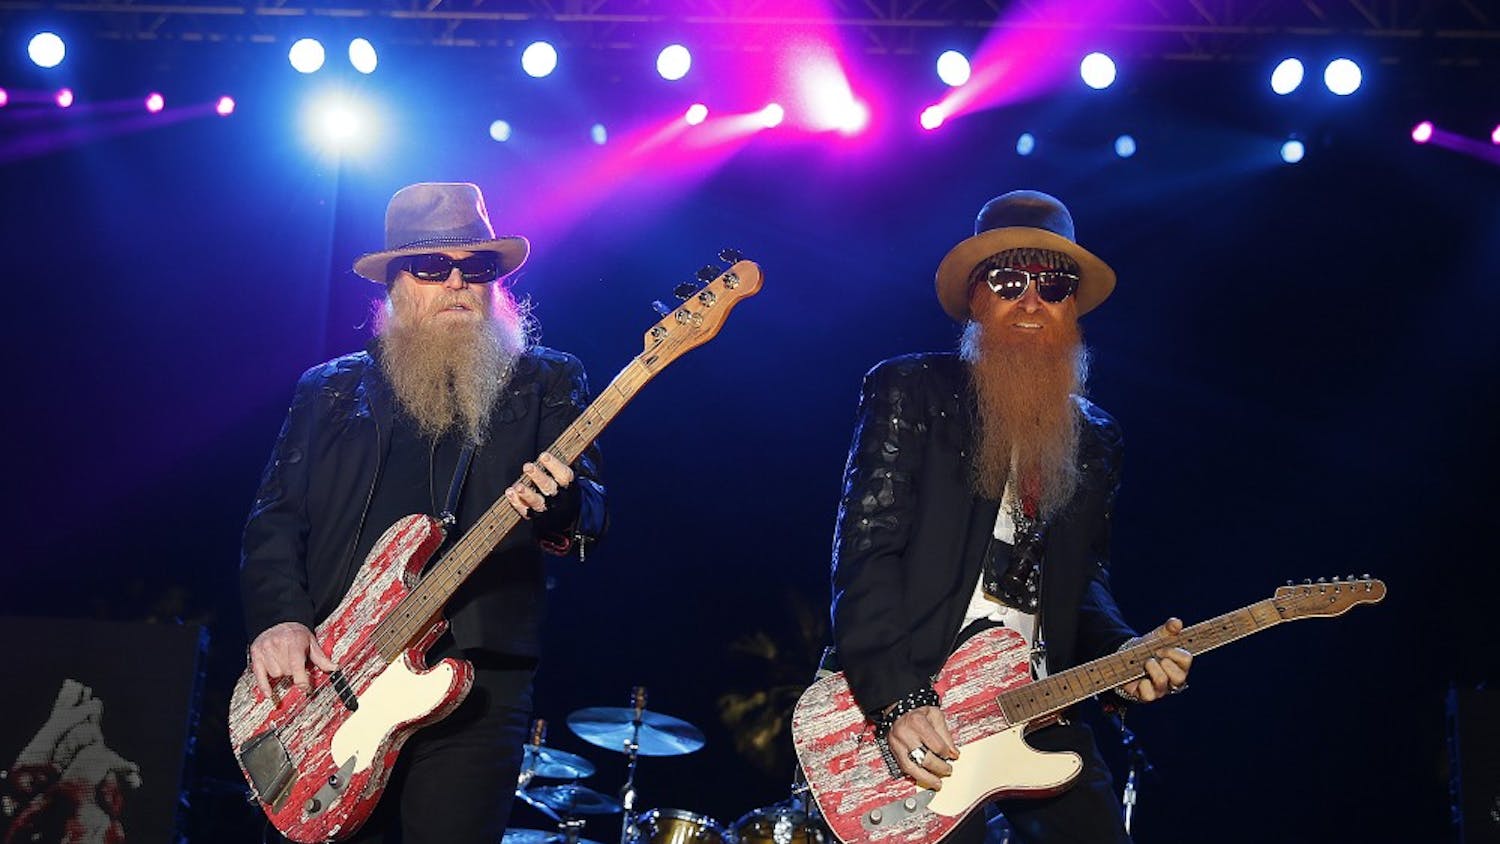 ZZ Top bassist Dusty Hill, left, and guitarist Billy Gibbons perform on the Palomino Stage during day two of the Stagecoach Country Music Festival on Saturday, April 25, 2015, at the Empire Polo Club in Indio, Calif. (Allen J. Schaben/Los Angeles Times/TNS)